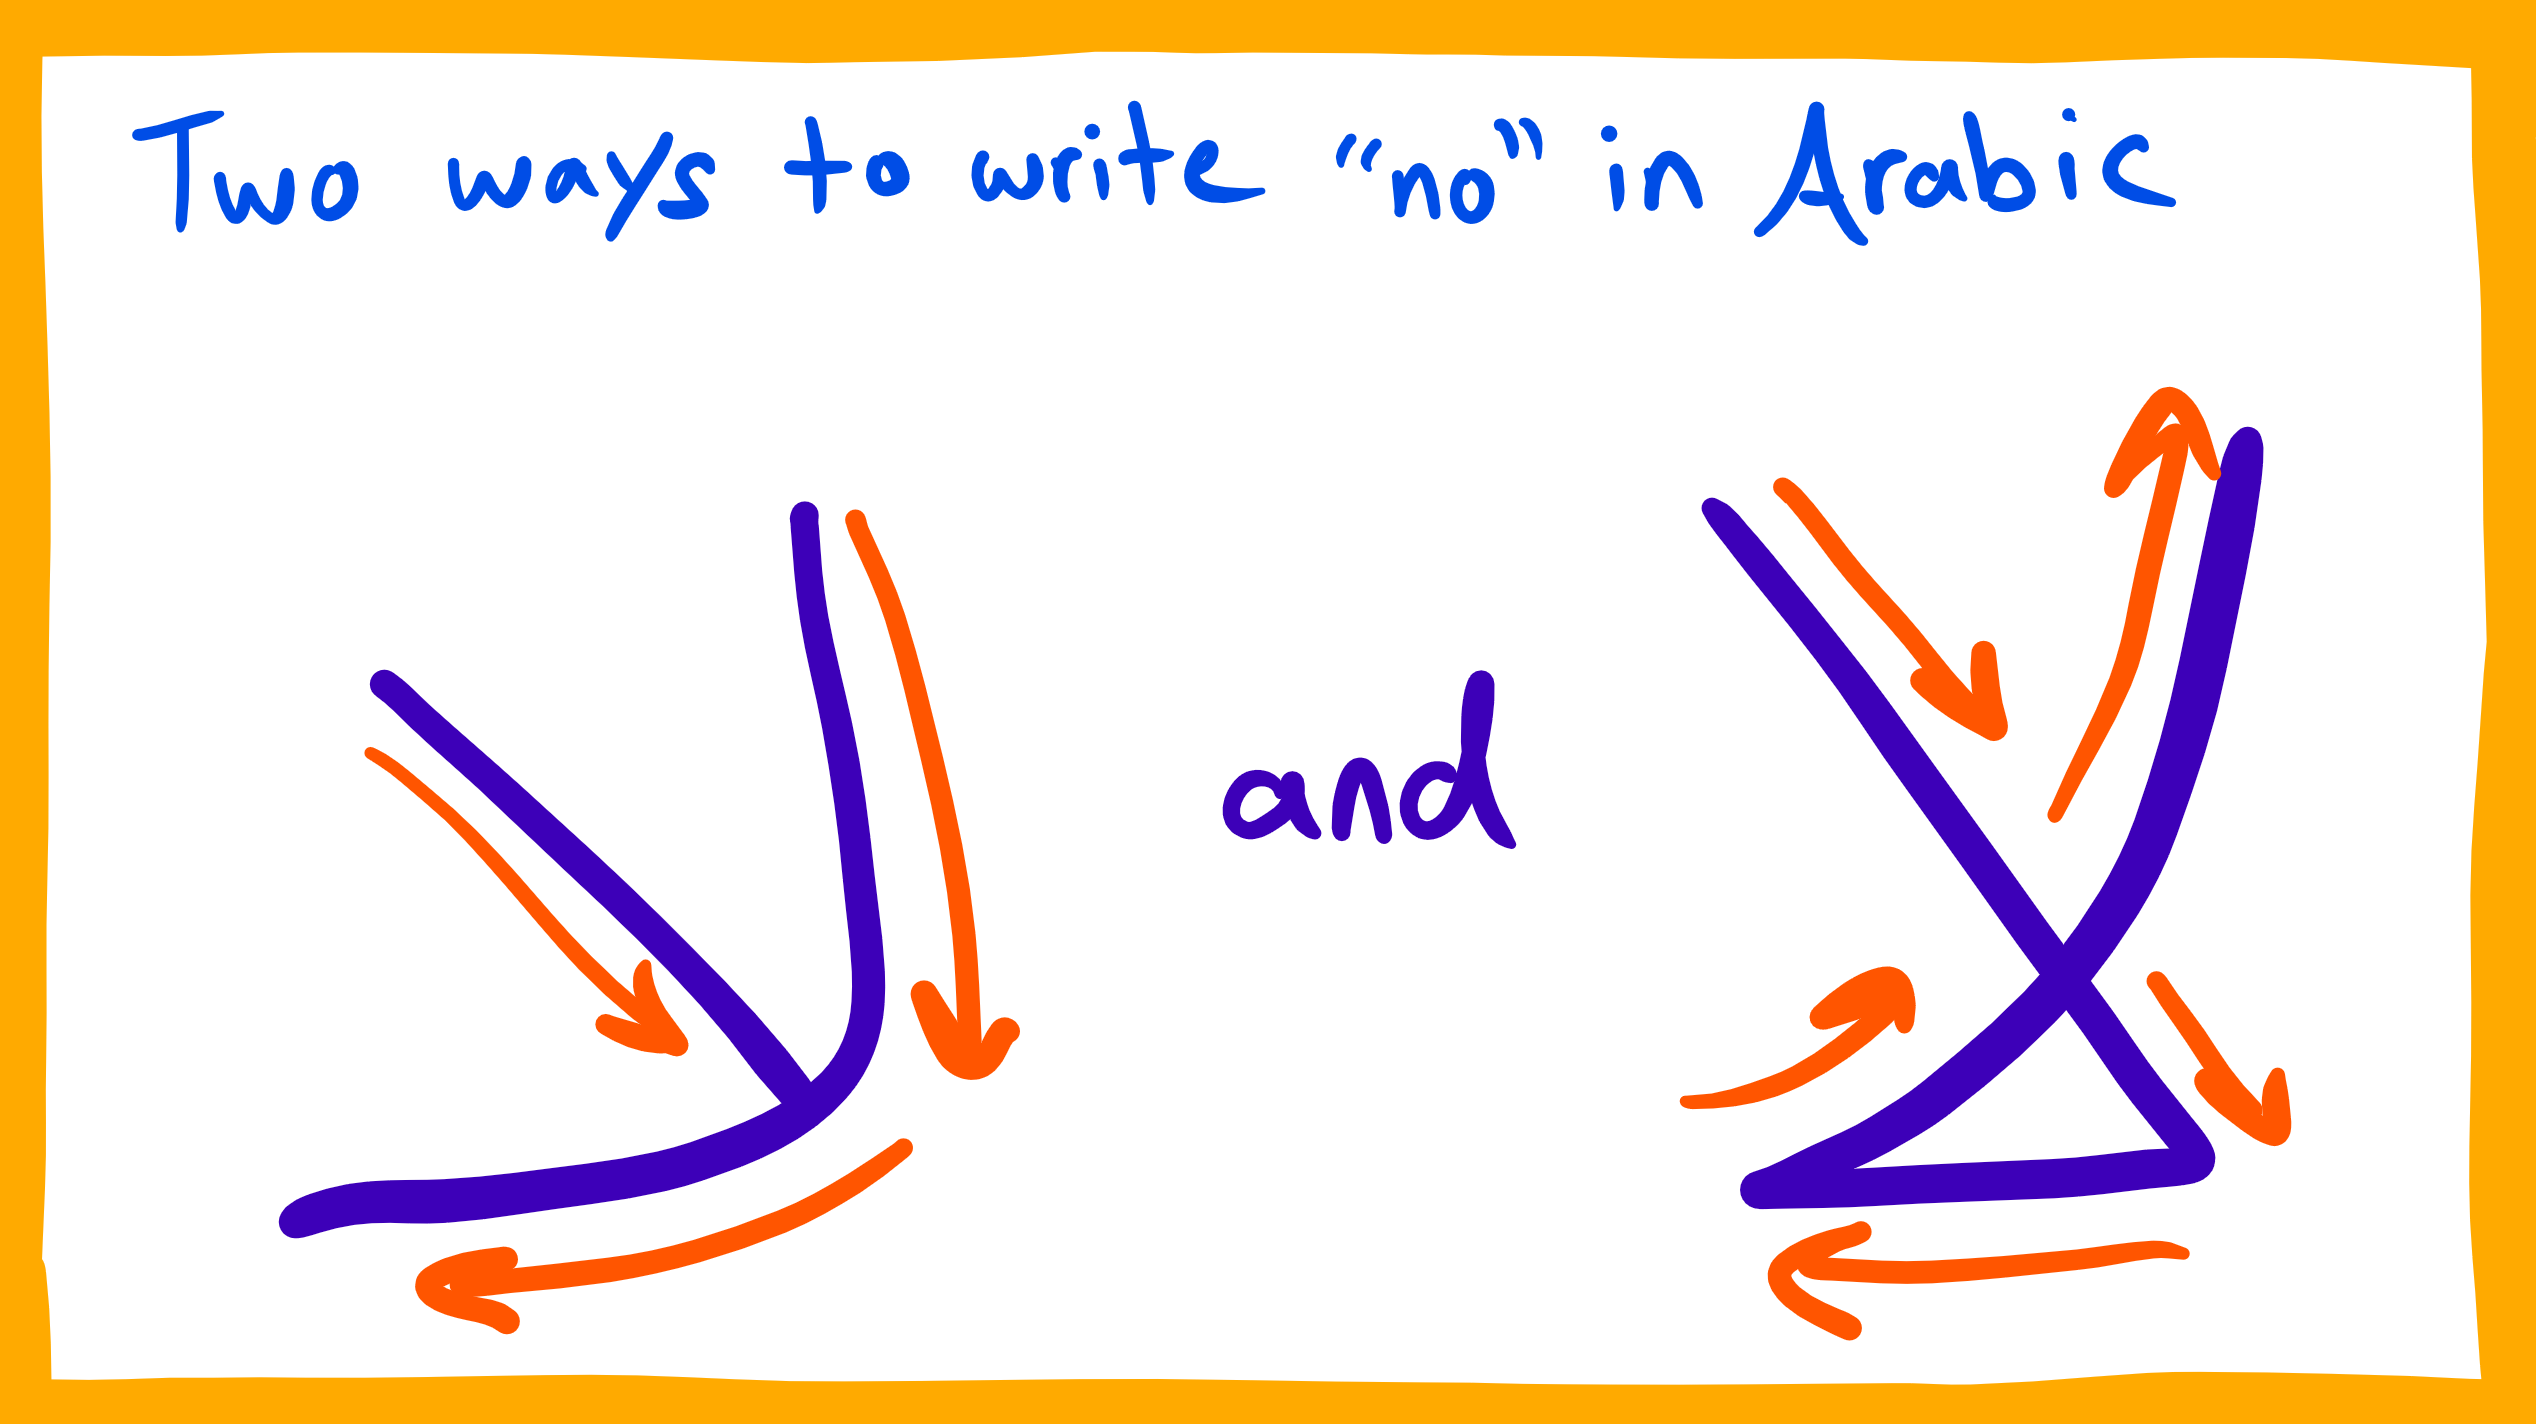 Is There Only One Way To Use “nolaa” In Arabic Arabic Language Blog 